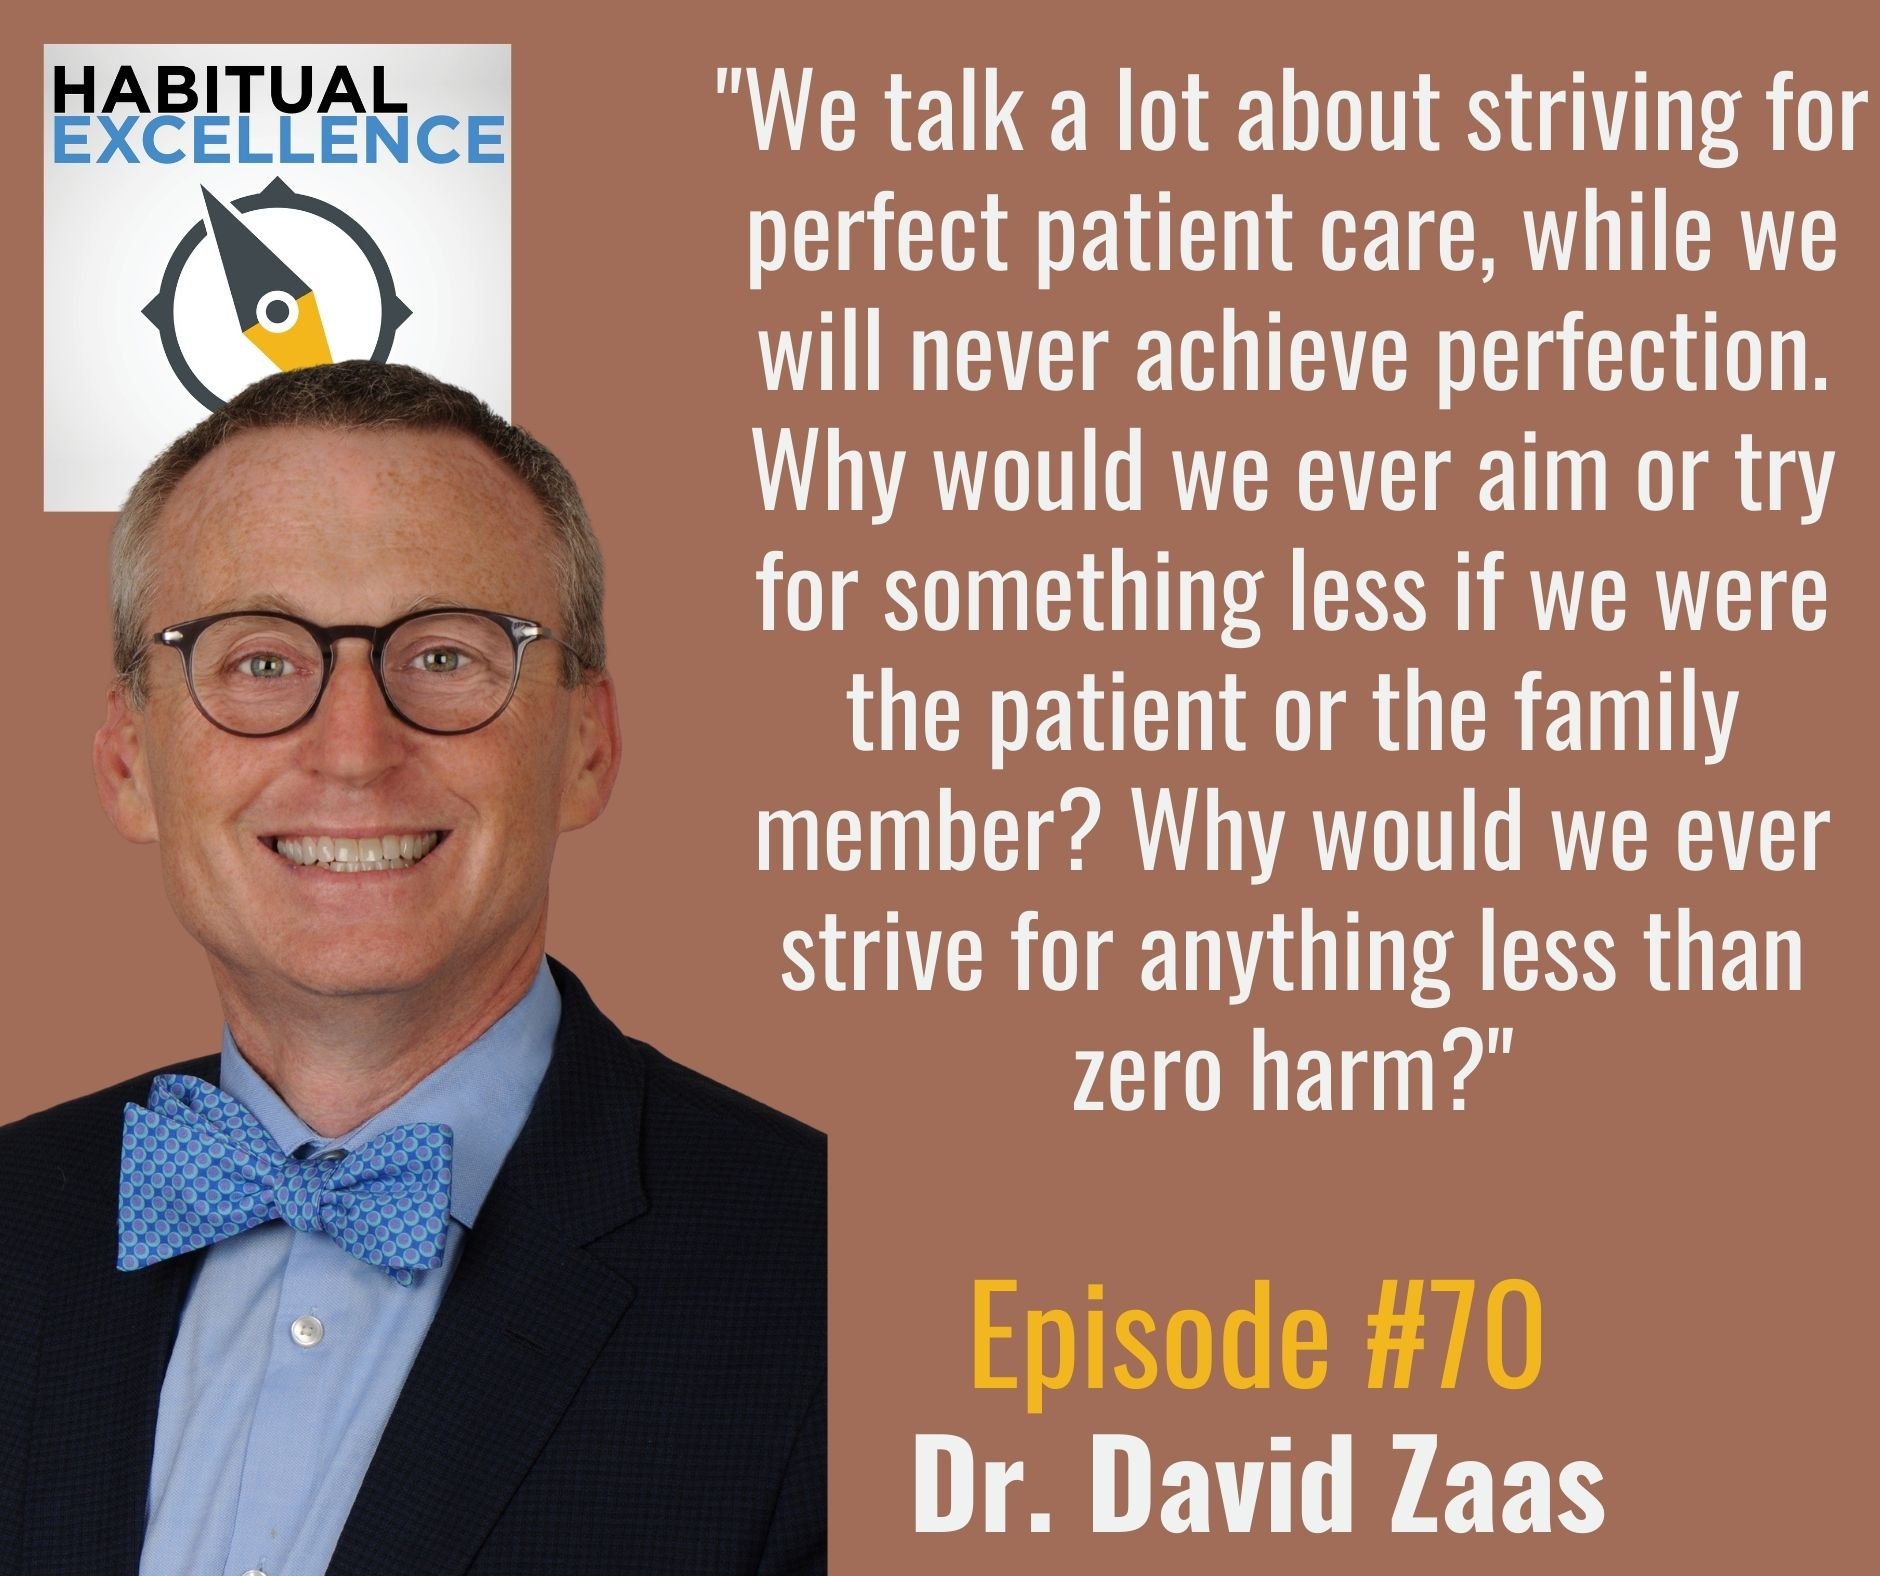 "We talk a lot about striving for perfect patient care, while we will never achieve perfection. Why would we ever aim or try for something less if we were the patient or the family member? Why would we ever strive for anything less than zero harm?"